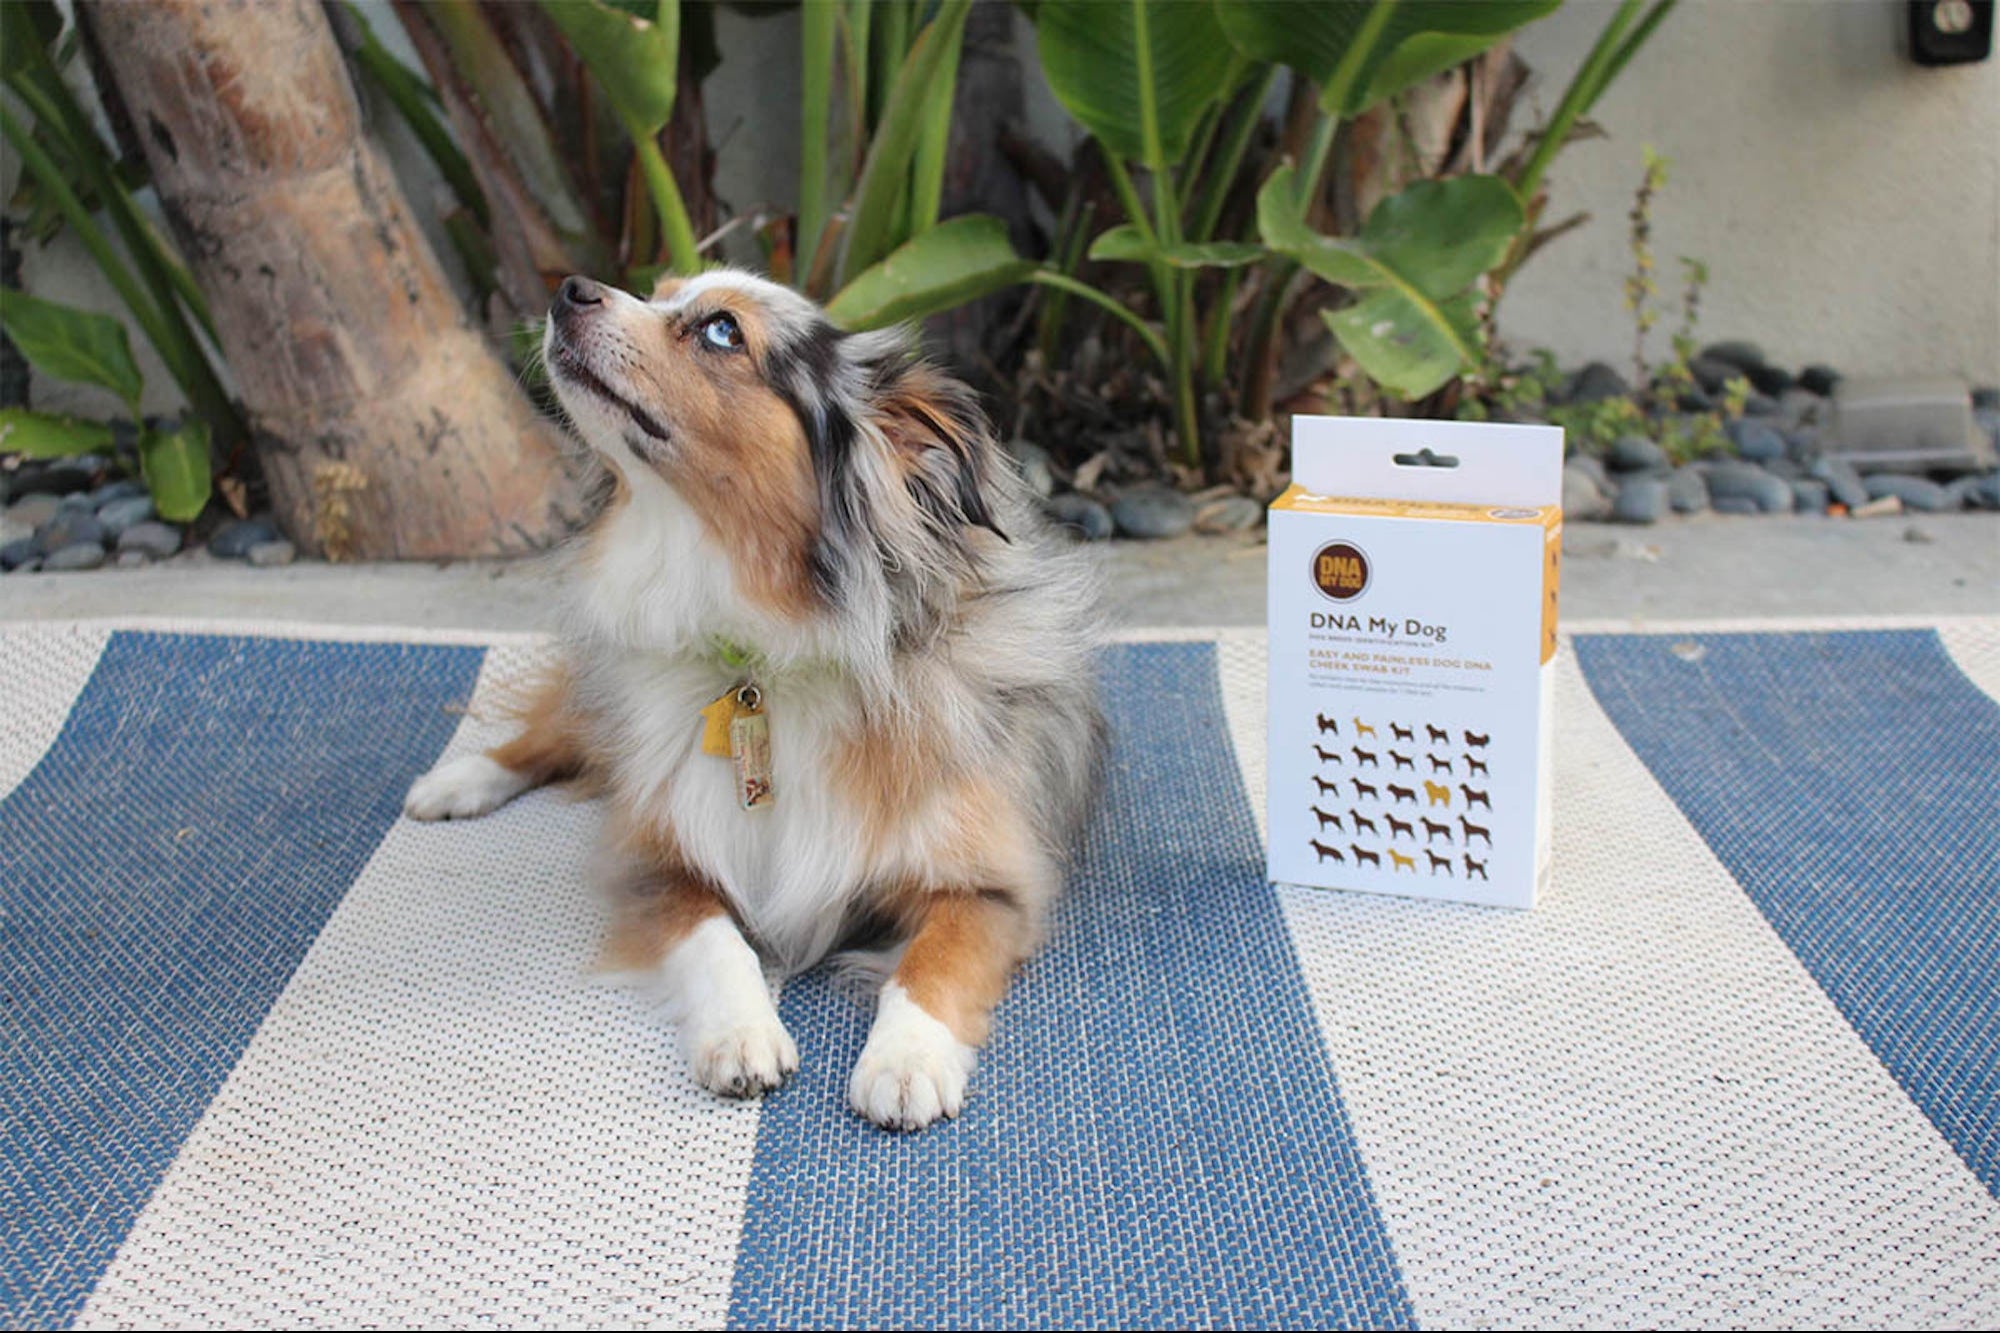 Support Female Entrepreneurs and Save on This Bestselling Doggy DNA Kit